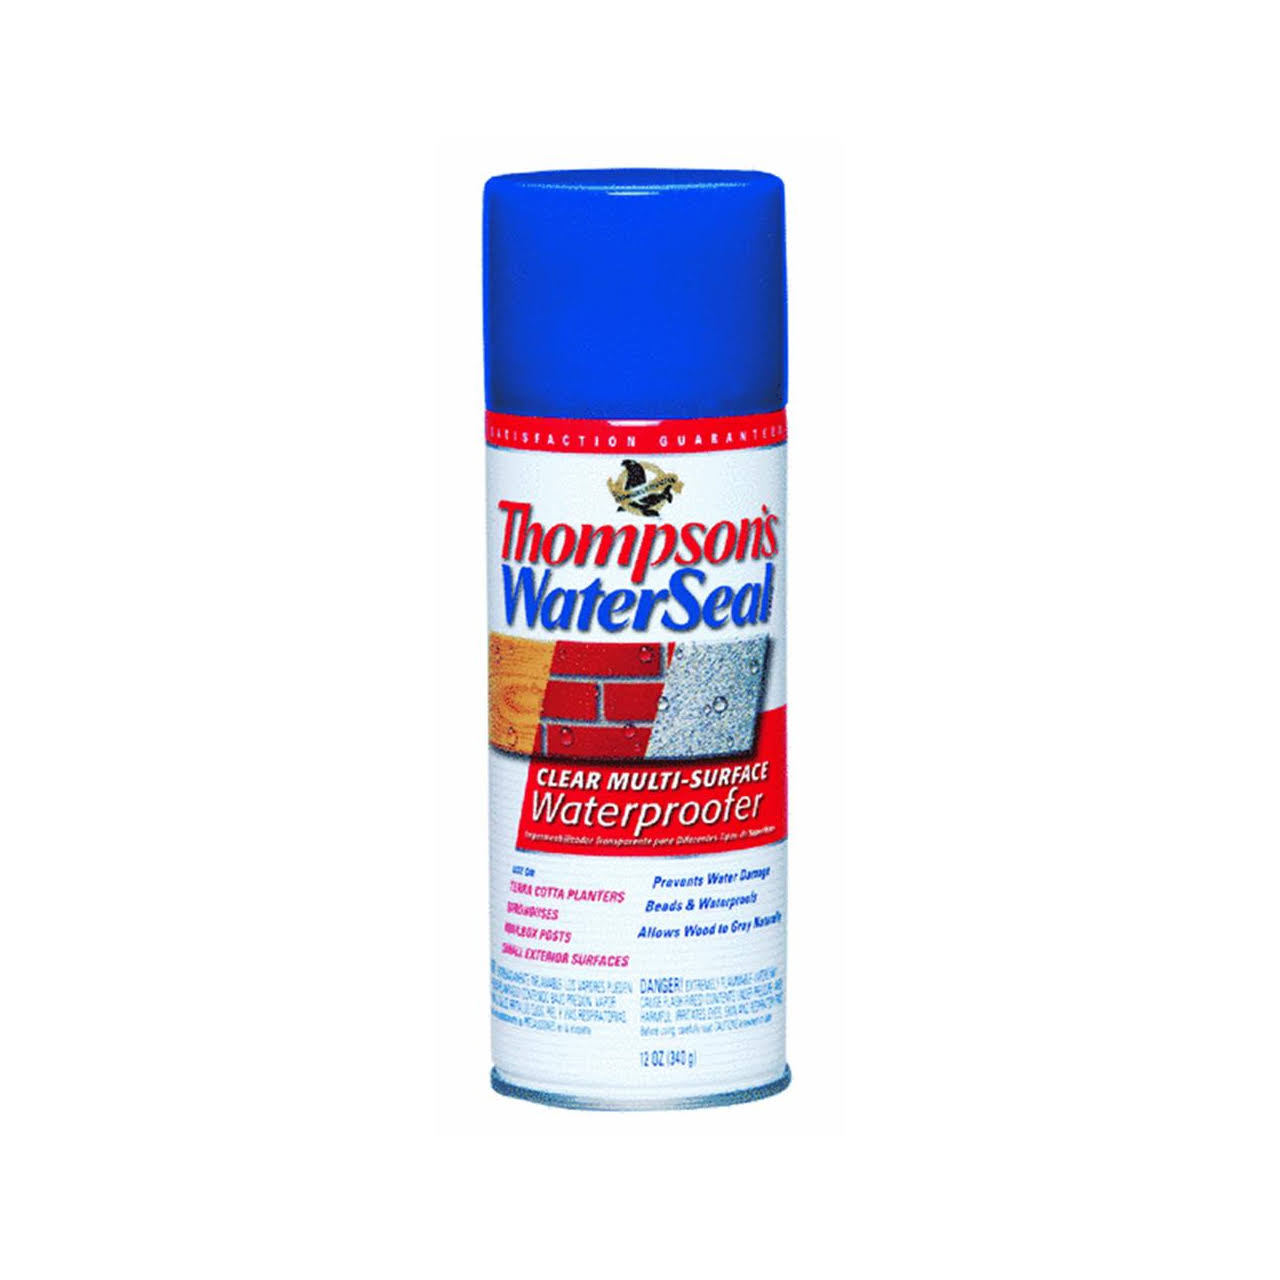 Thompson's Water Seal Multi-Surface Waterproofer - Clear, 12oz